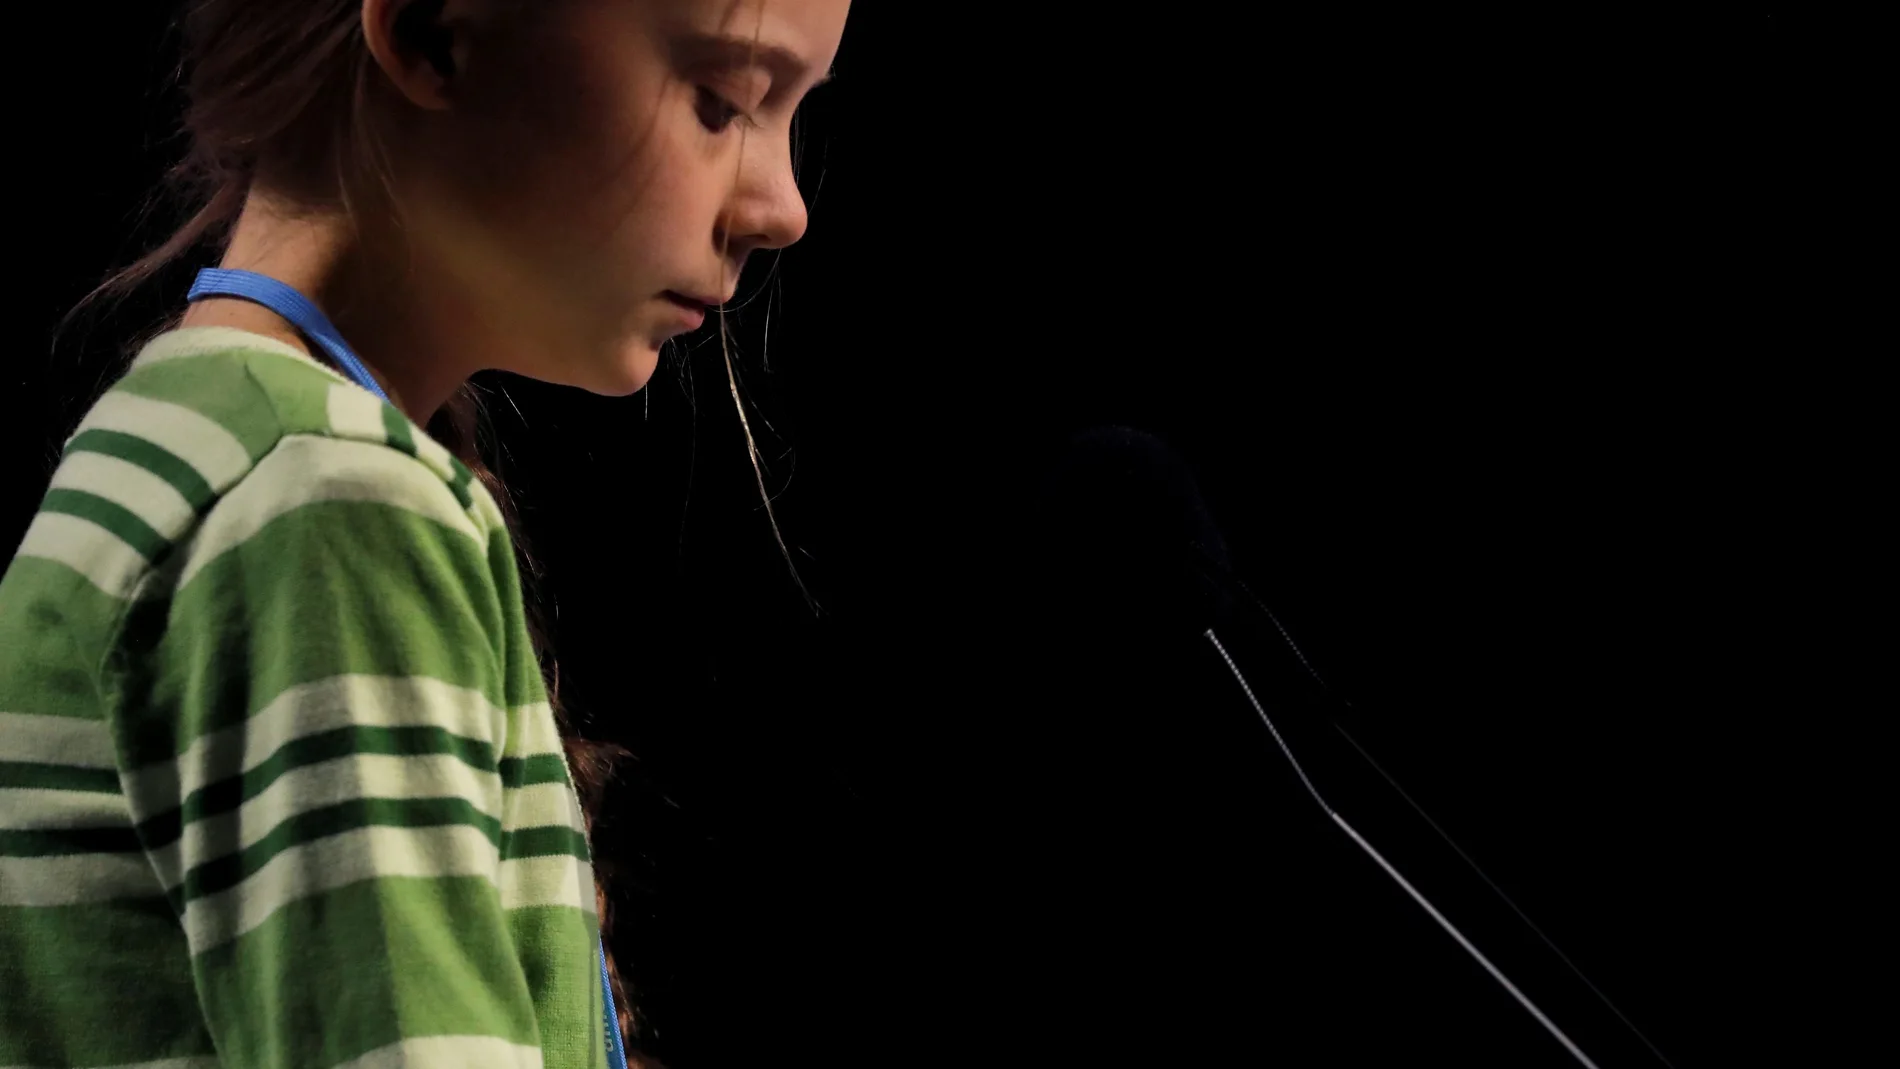 Climate change activist Greta Thunberg speaks at the High-Level event on Climate Emergency during the U.N. Climate Change Conference (COP25) in Madrid, Spain December 11, 2019. REUTERS/Susana Vera